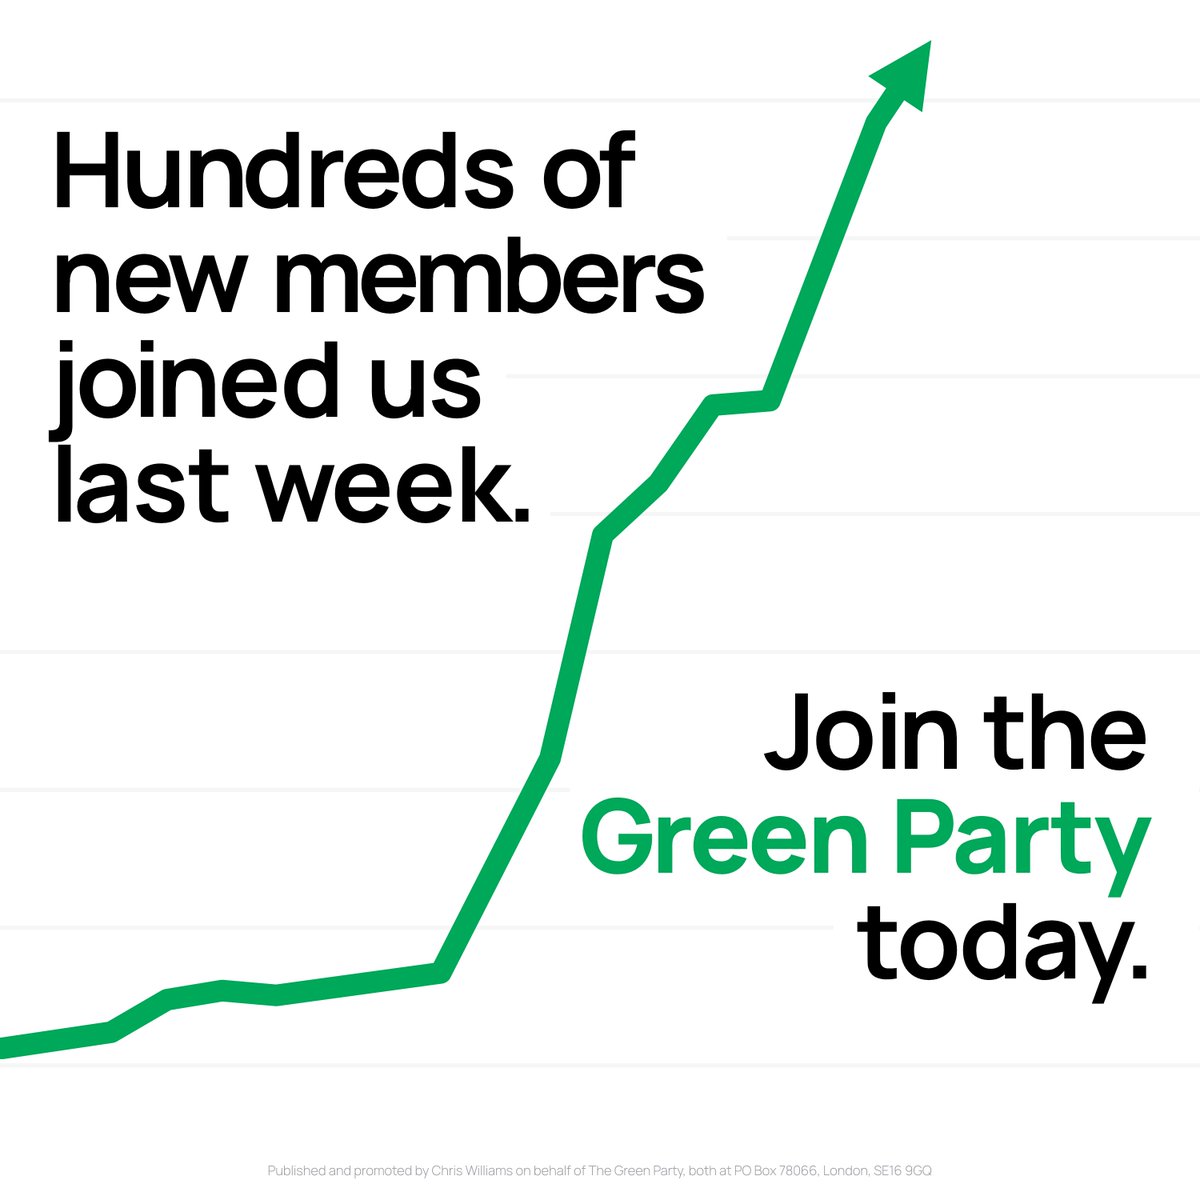 We've had a busy week welcoming hundreds of new members into @TheGreenParty. Our 800+ Councillors are working hard to build a fairer, greener country. Whatever you can contribute, there's a place for you in our movement. Join the Green Party today. join.greenparty.org.uk